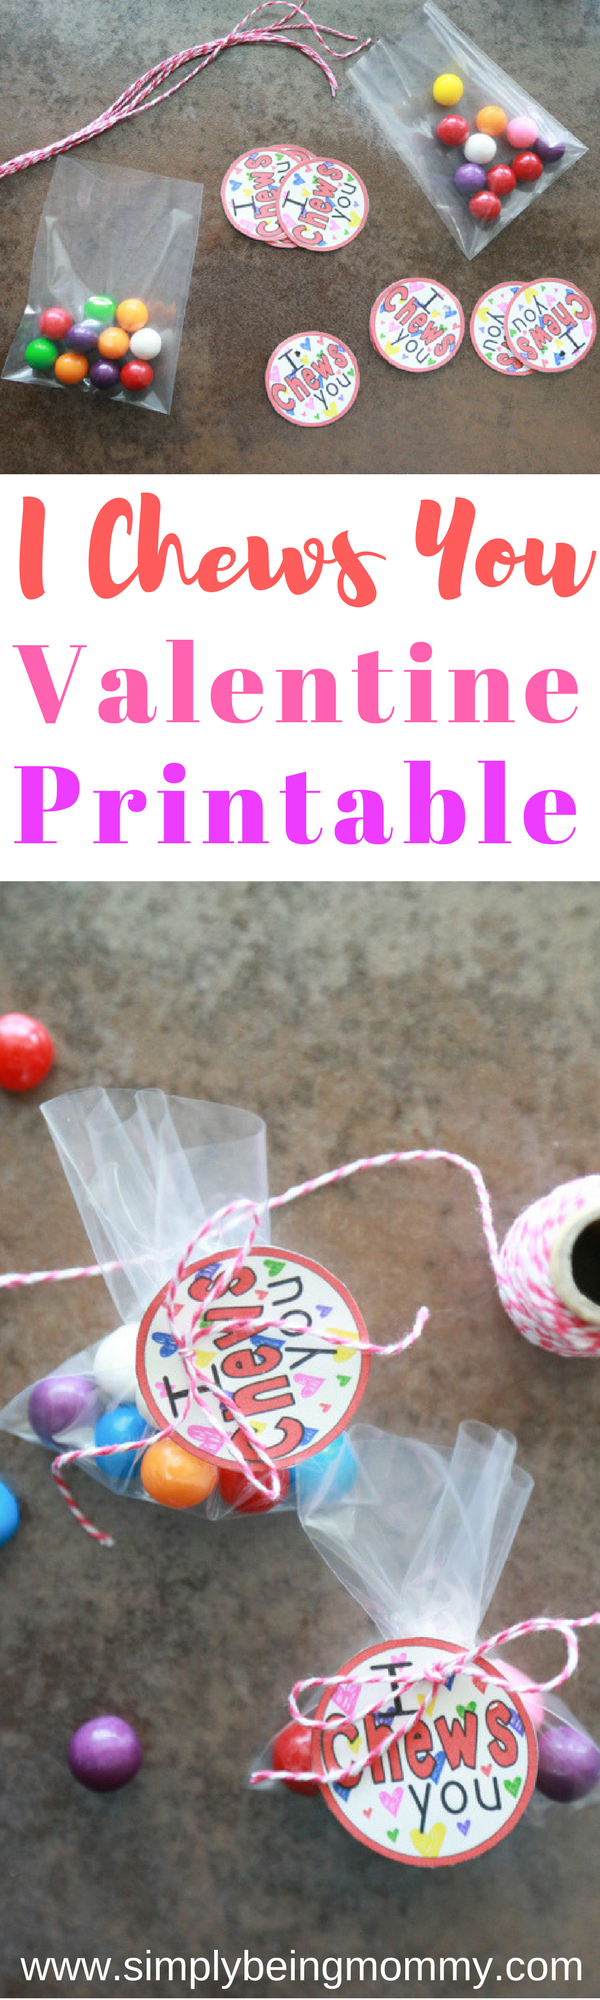 Although Valentine's Day is quickly approaching, you still have time to make these adorable I Chews You Valentine Printables.